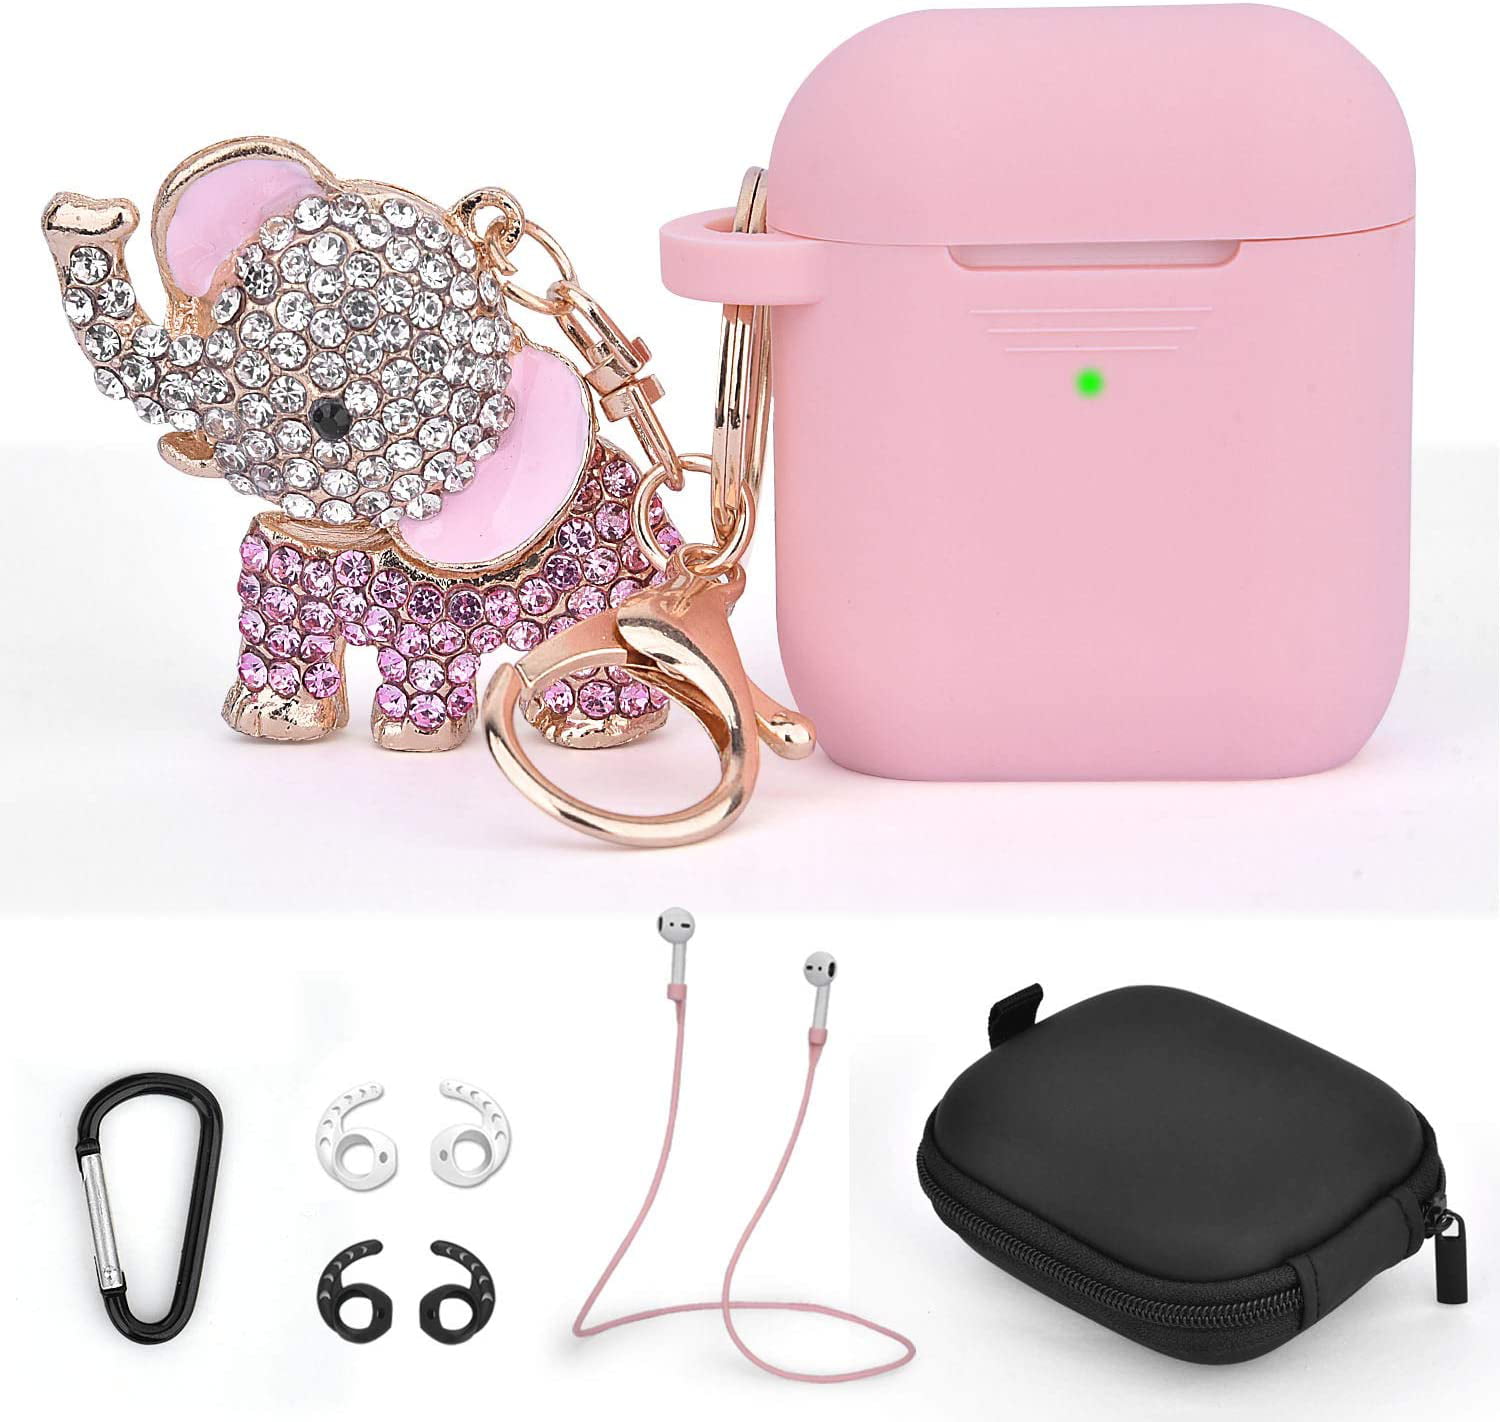 Leather AirPods Case Heart Airpods Case Pink Girly Airpods Cover Headphone Holder Leather Airpod Keychain AirPod 1 Airpod 2 Case pouch gift